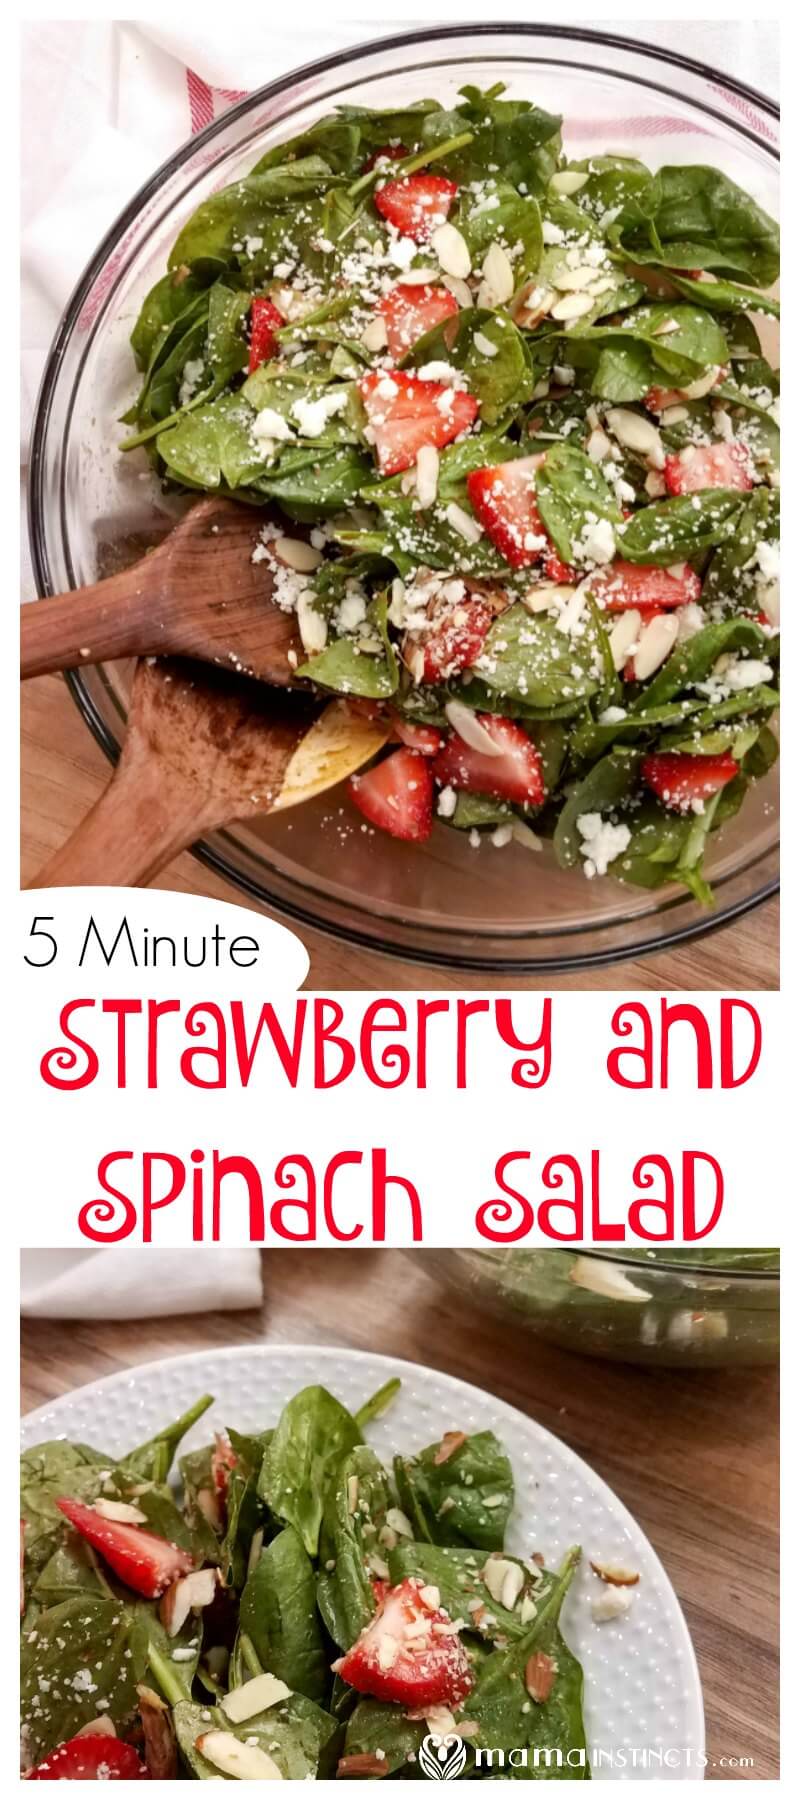 Try this delicious salad with spinach, strawberry, nuts and feta cheese! Takes only minutes to make and everyone will love it. #saladrecipe #spinachsalad